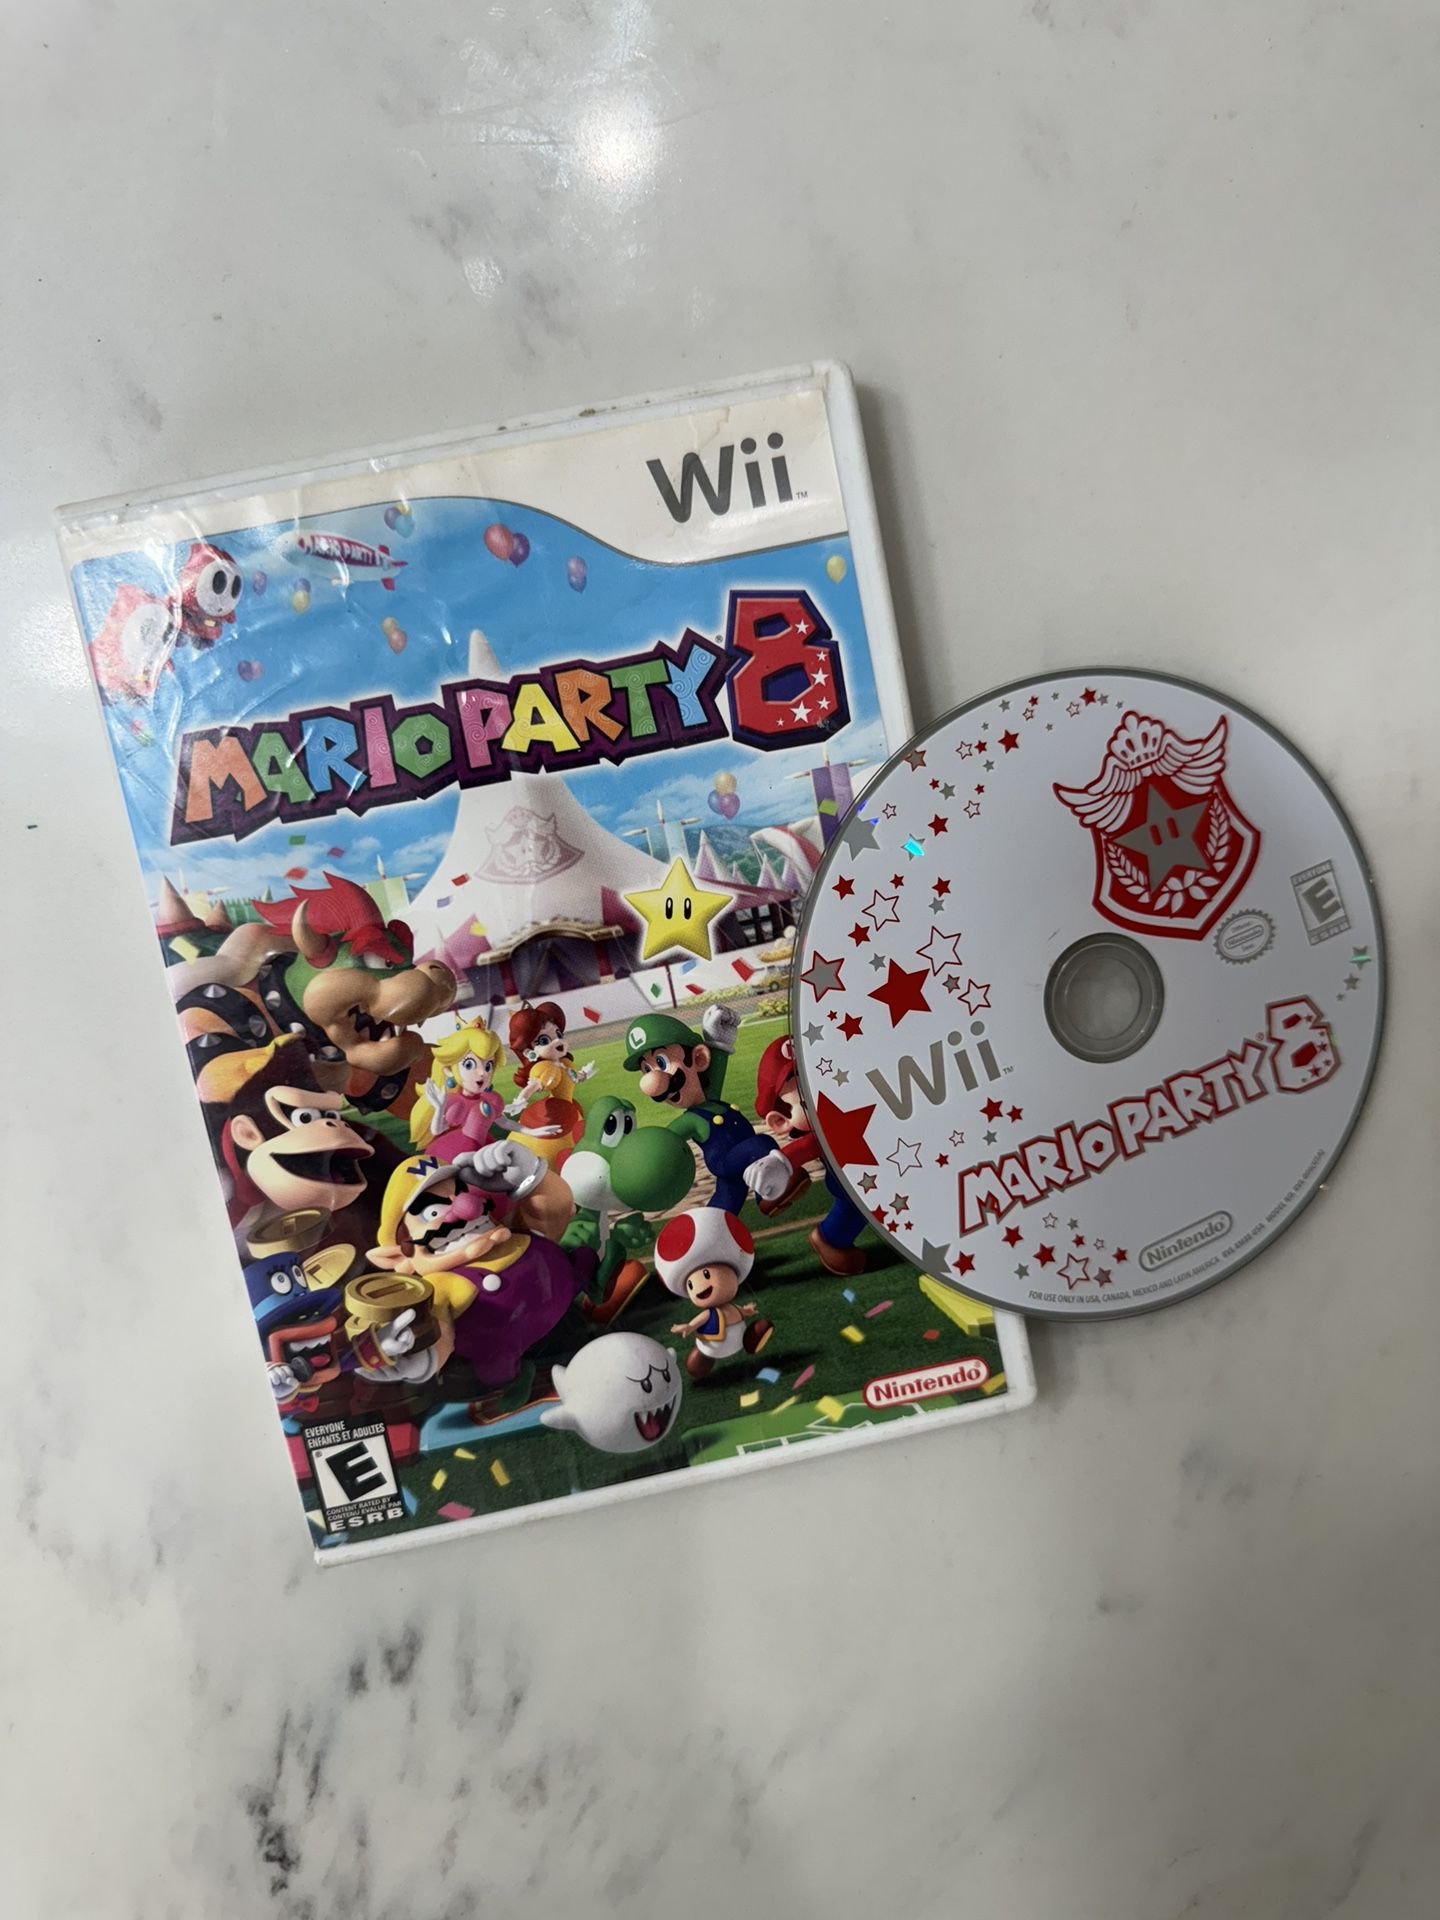 Mario Party 8 Very Clean Disc for Nintendo Wii